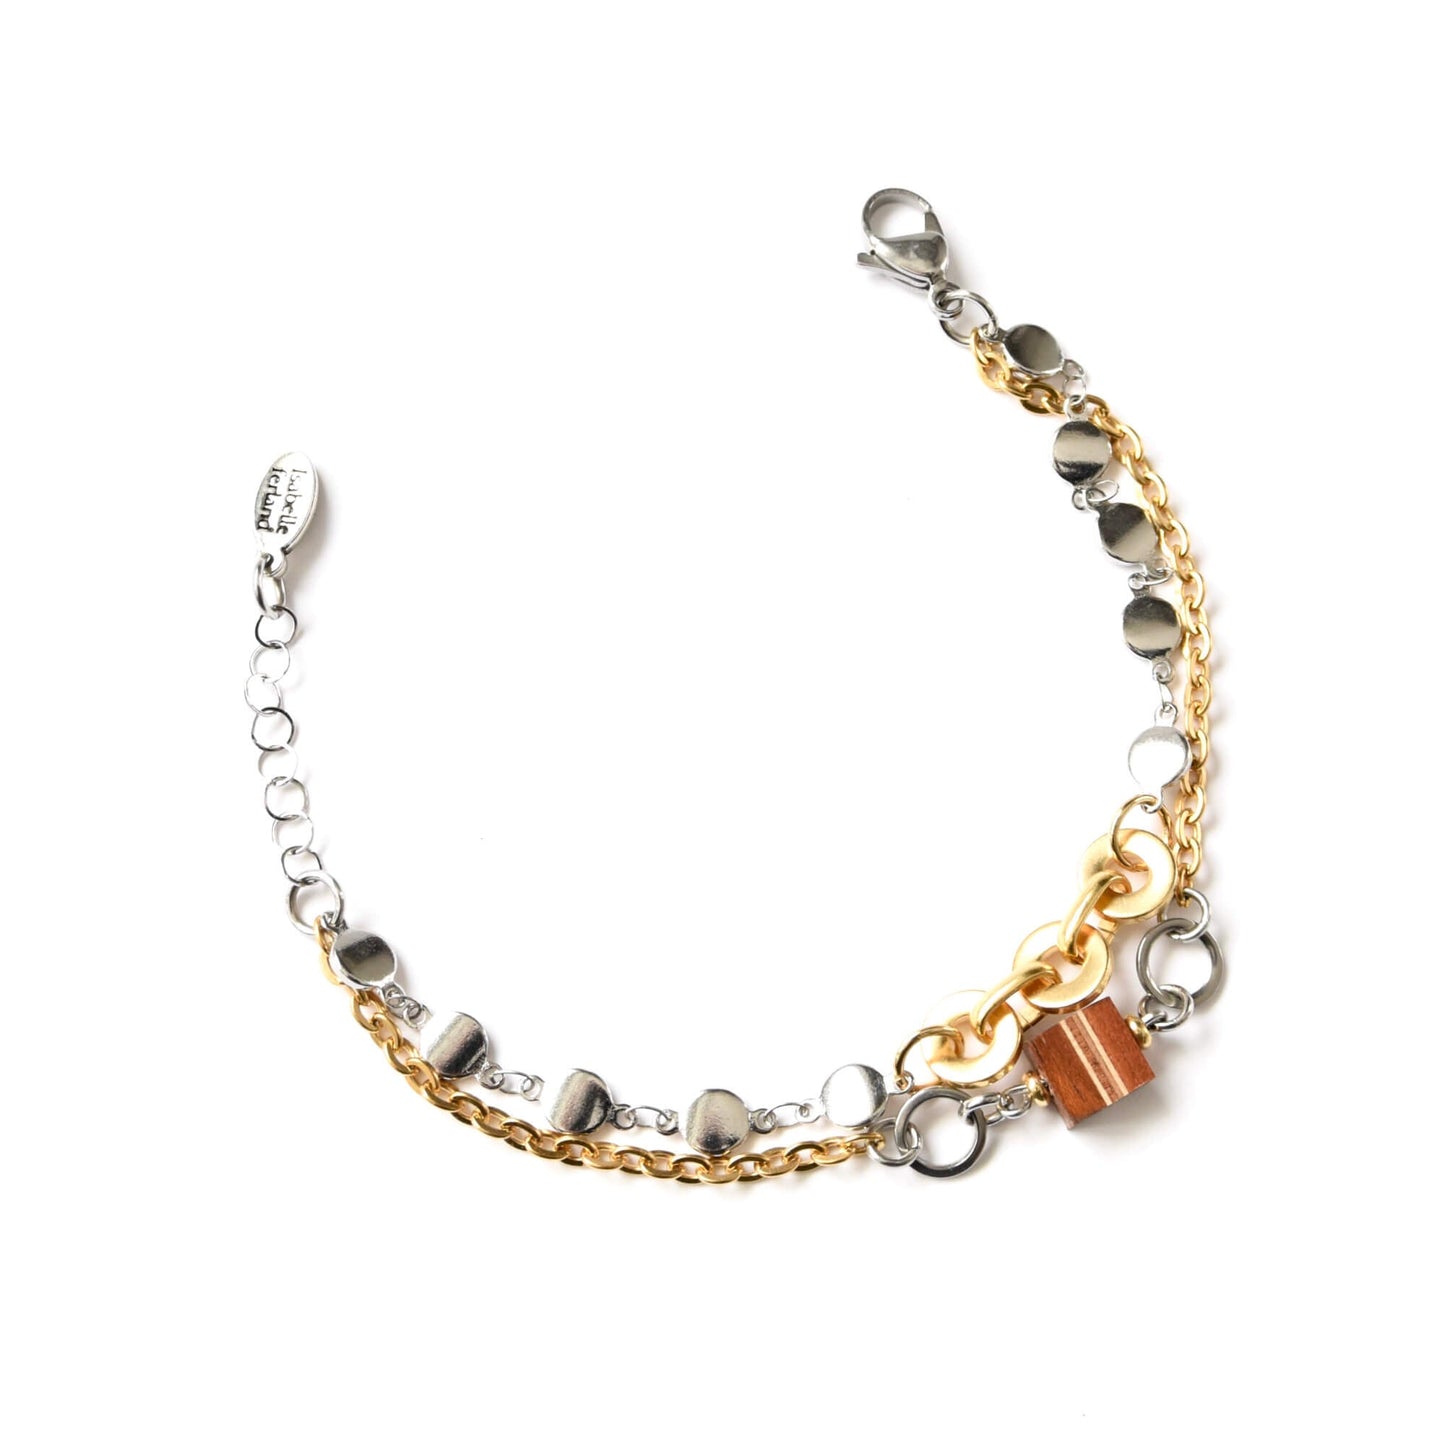 Bracelet, Hora Dorada, Canadian woods, Gold and Silver chains